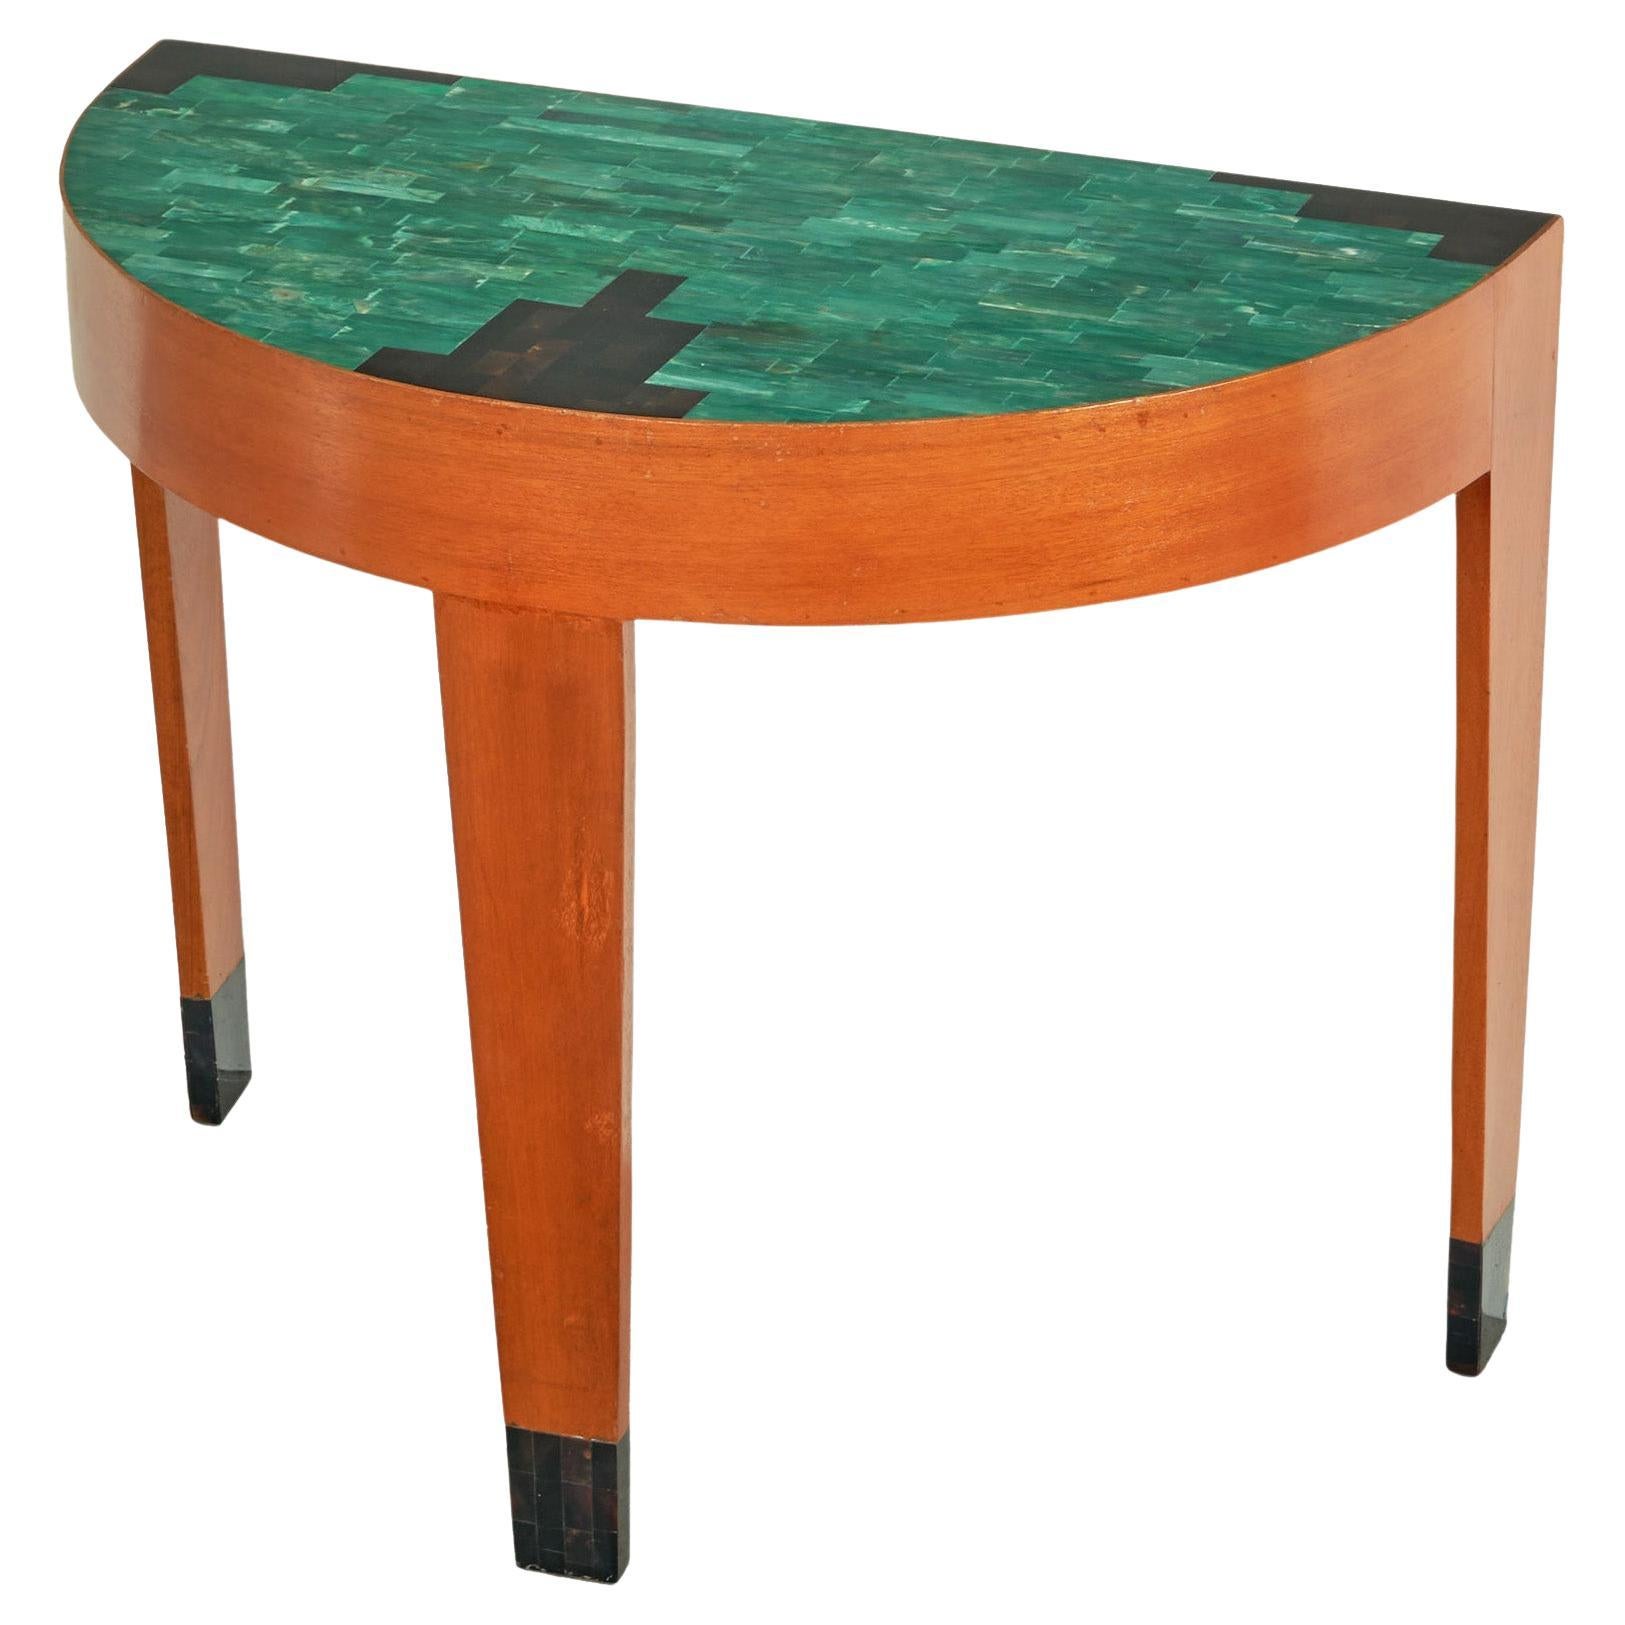 Art Deco Demi Lune Table in Malachite and Brown Shell Mosaic and Wood 1930s For Sale